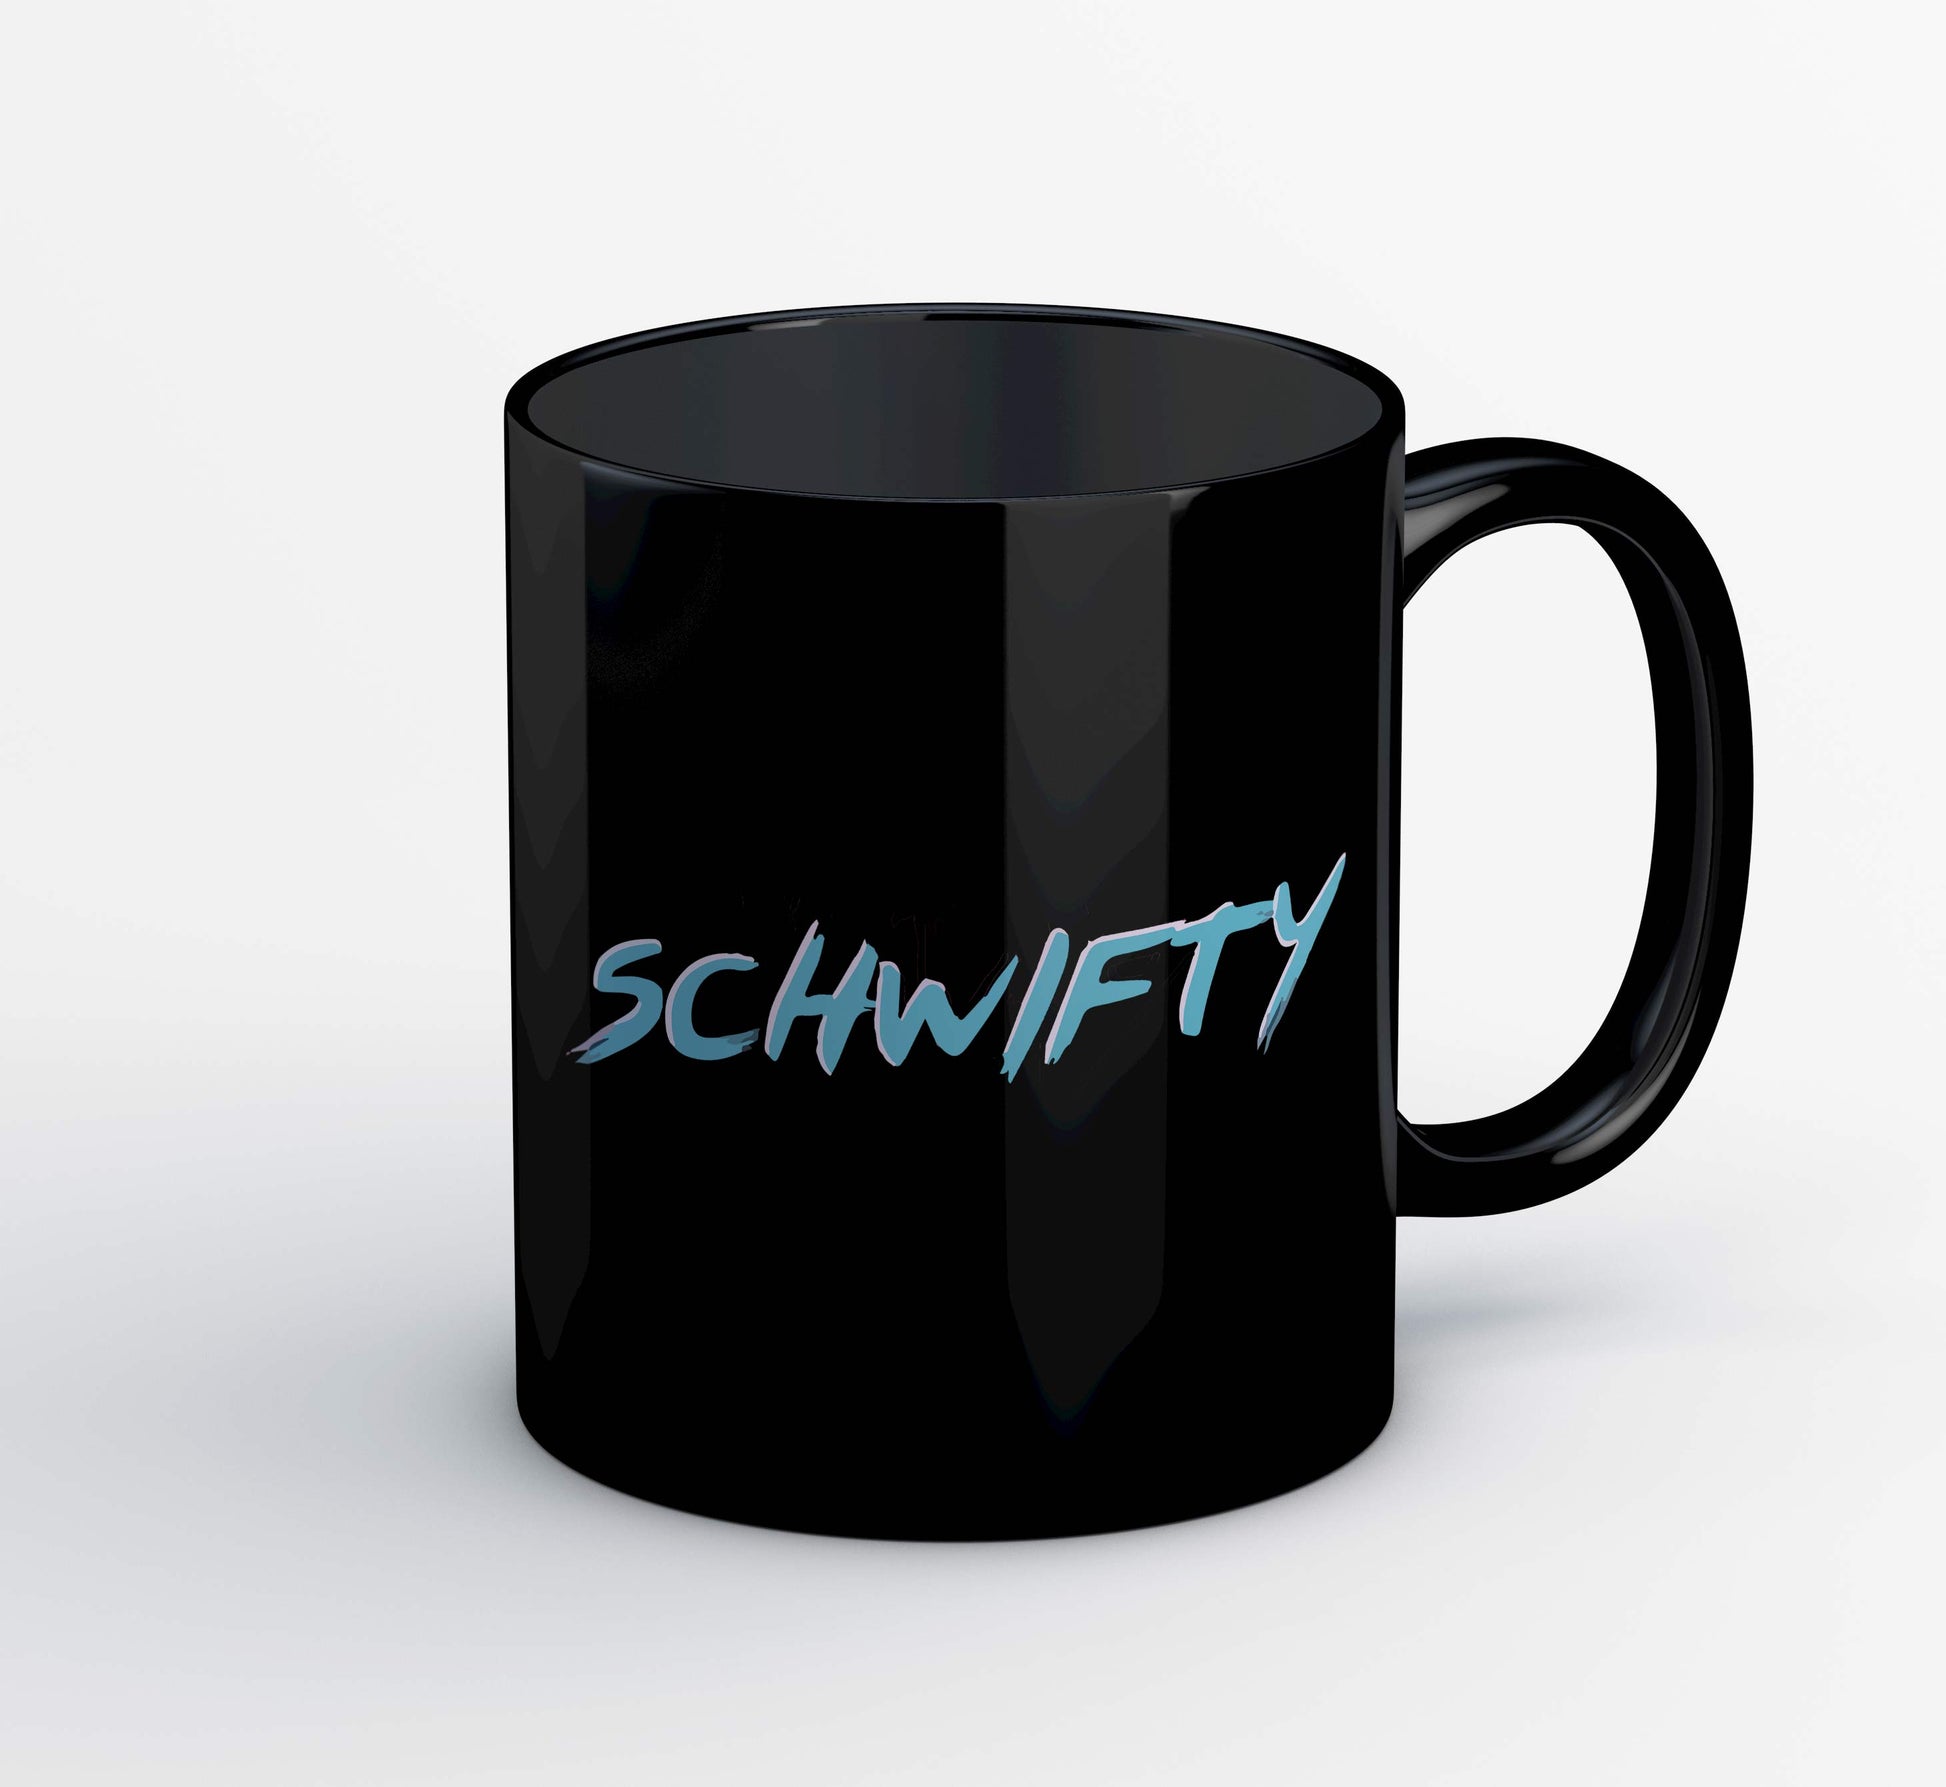 rick and morty schwifty mug coffee ceramic buy online india the banyan tee tbt men women girls boys unisex  rick and morty online summer beth mr meeseeks jerry quote vector art clothing accessories merchandise